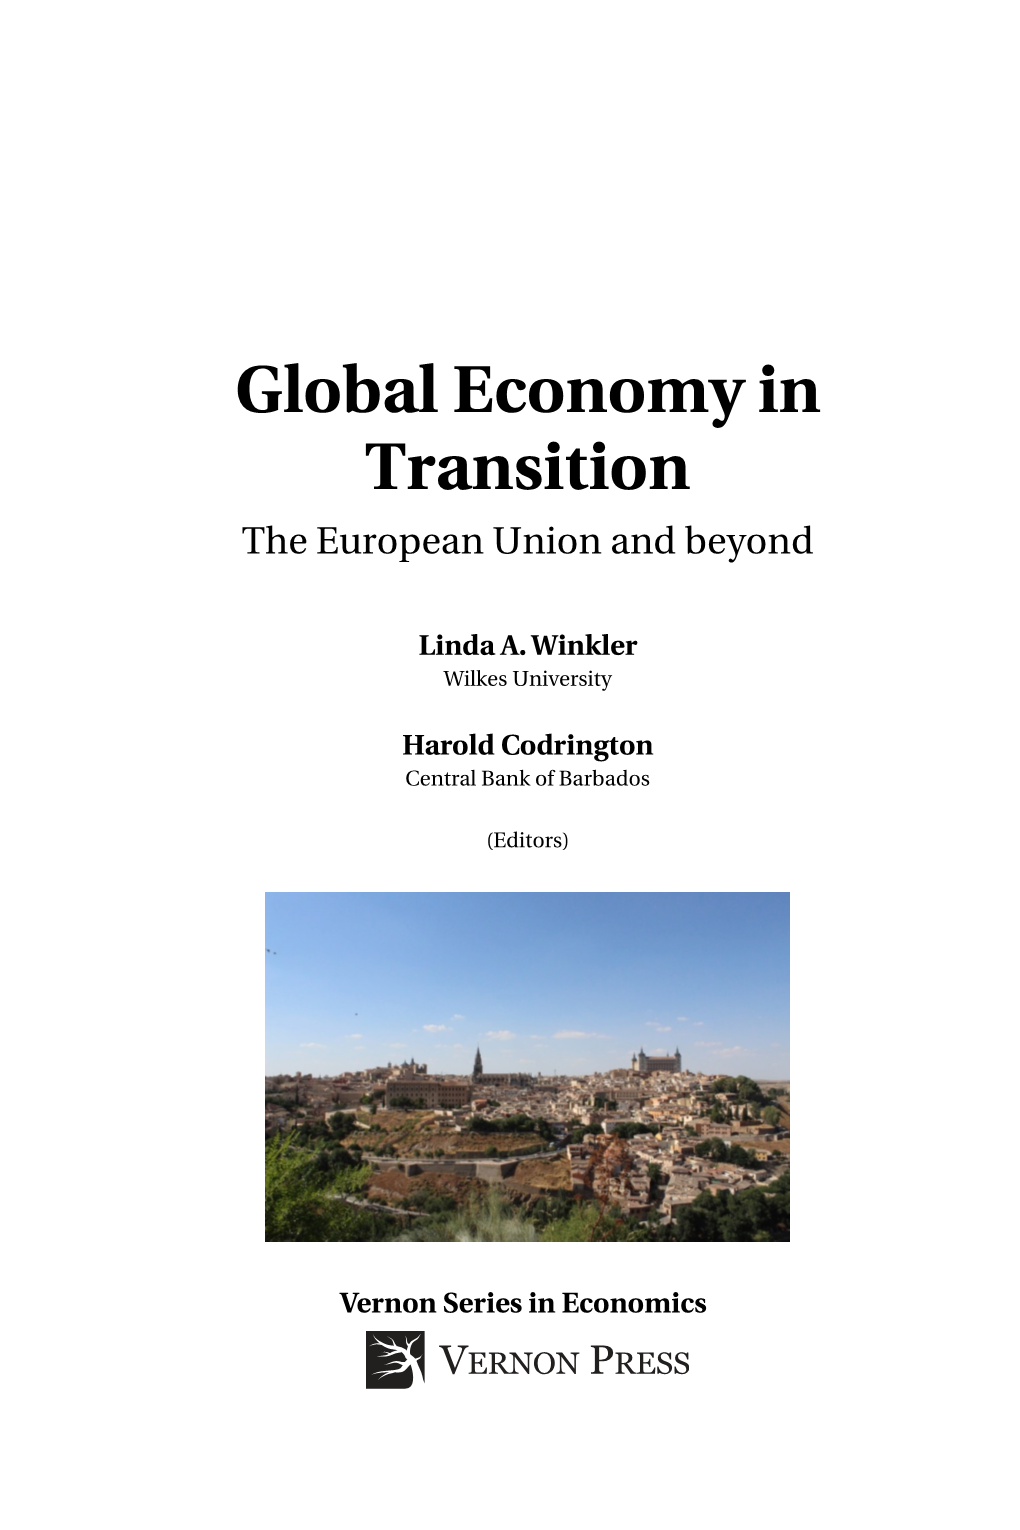 Global Economy in Transition the European Union and Beyond